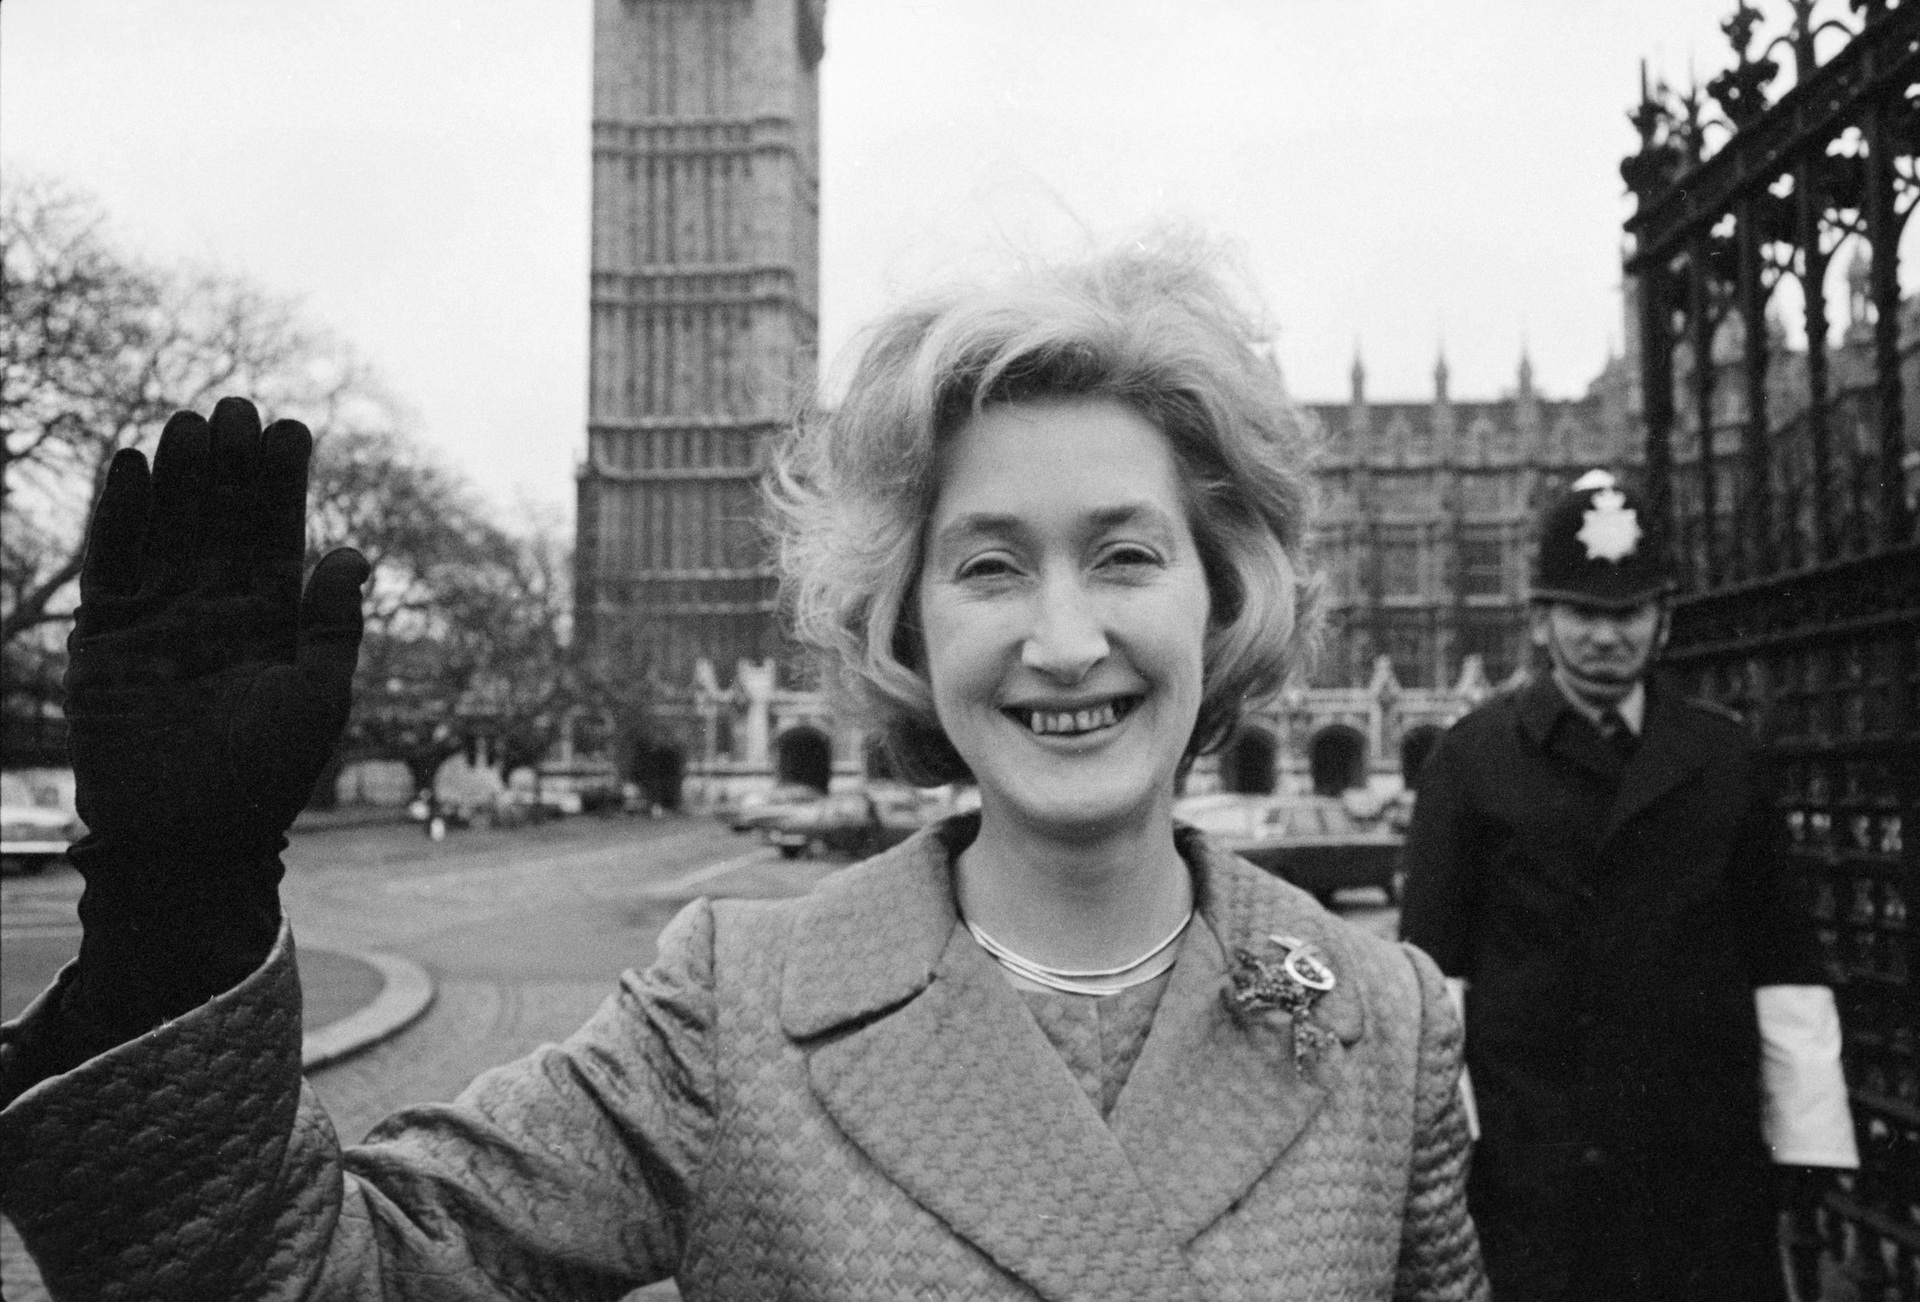 Winnie Ewing was a trailblazing politician, becoming the SNP's first female MP in 1967.